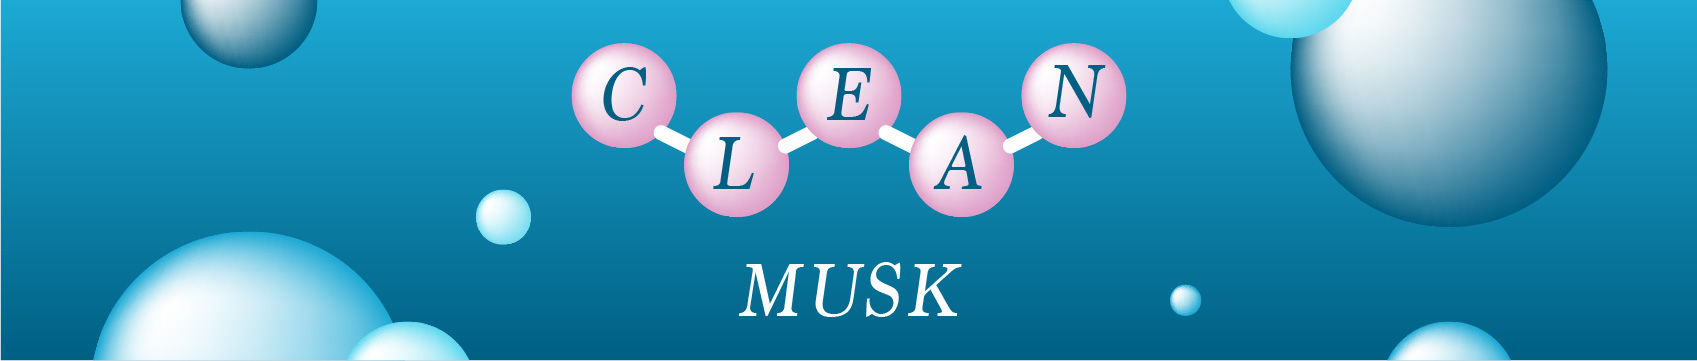 illustration of molecules clean musk